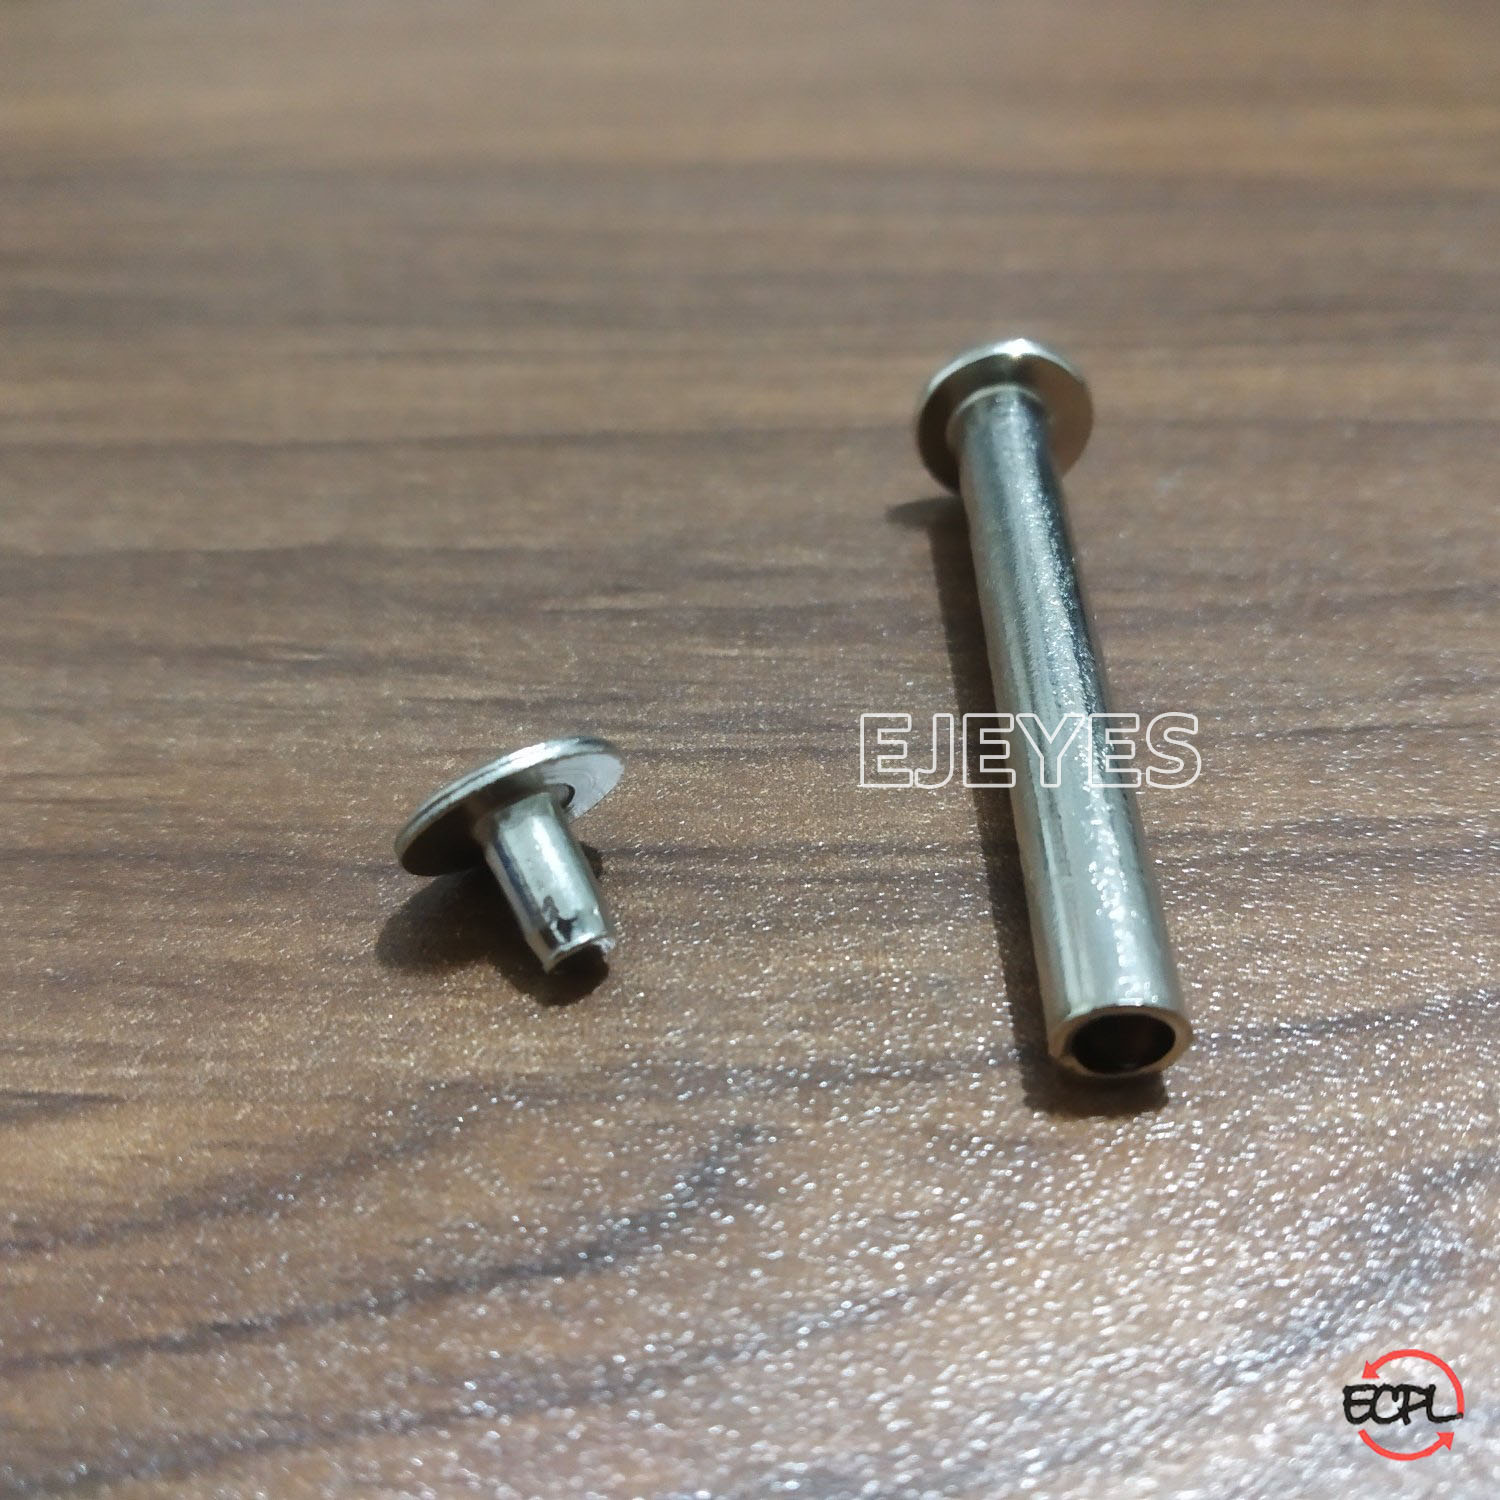 Nickel-plated 40mm steel hollow rivet: A durable and versatile hardware component for secure and reliable assembly.